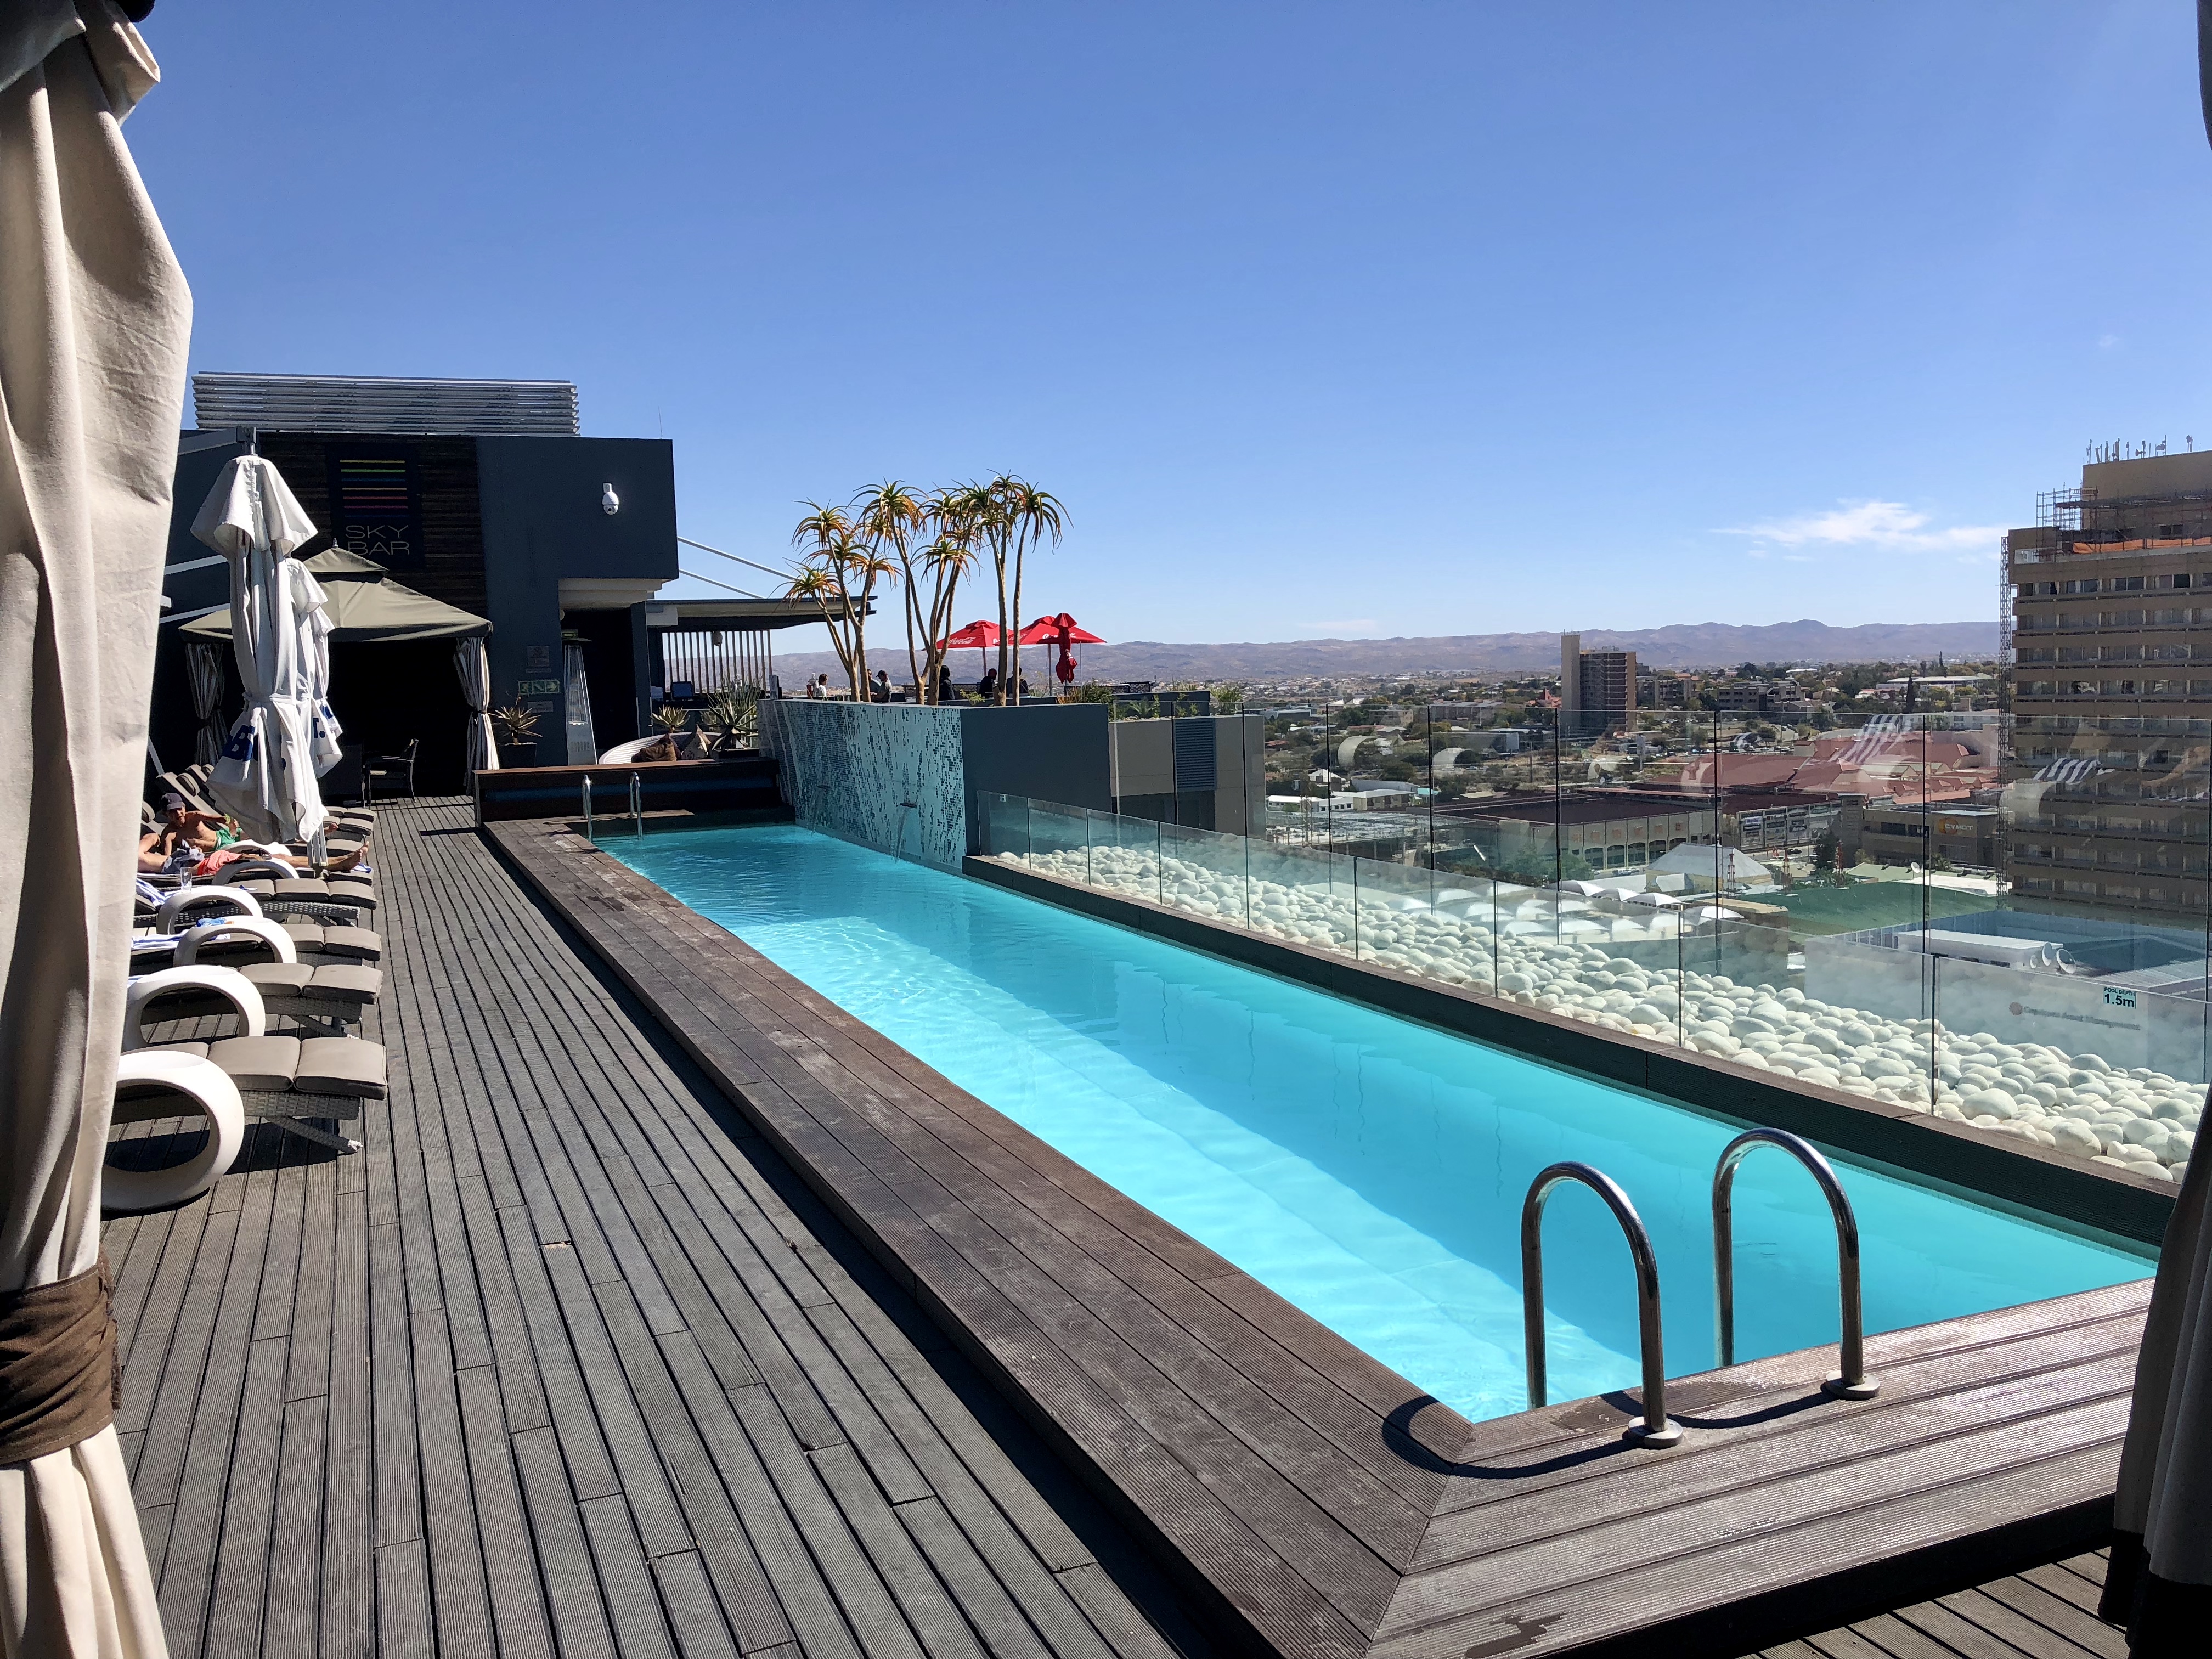 a pool on a deck with a building and a city in the background